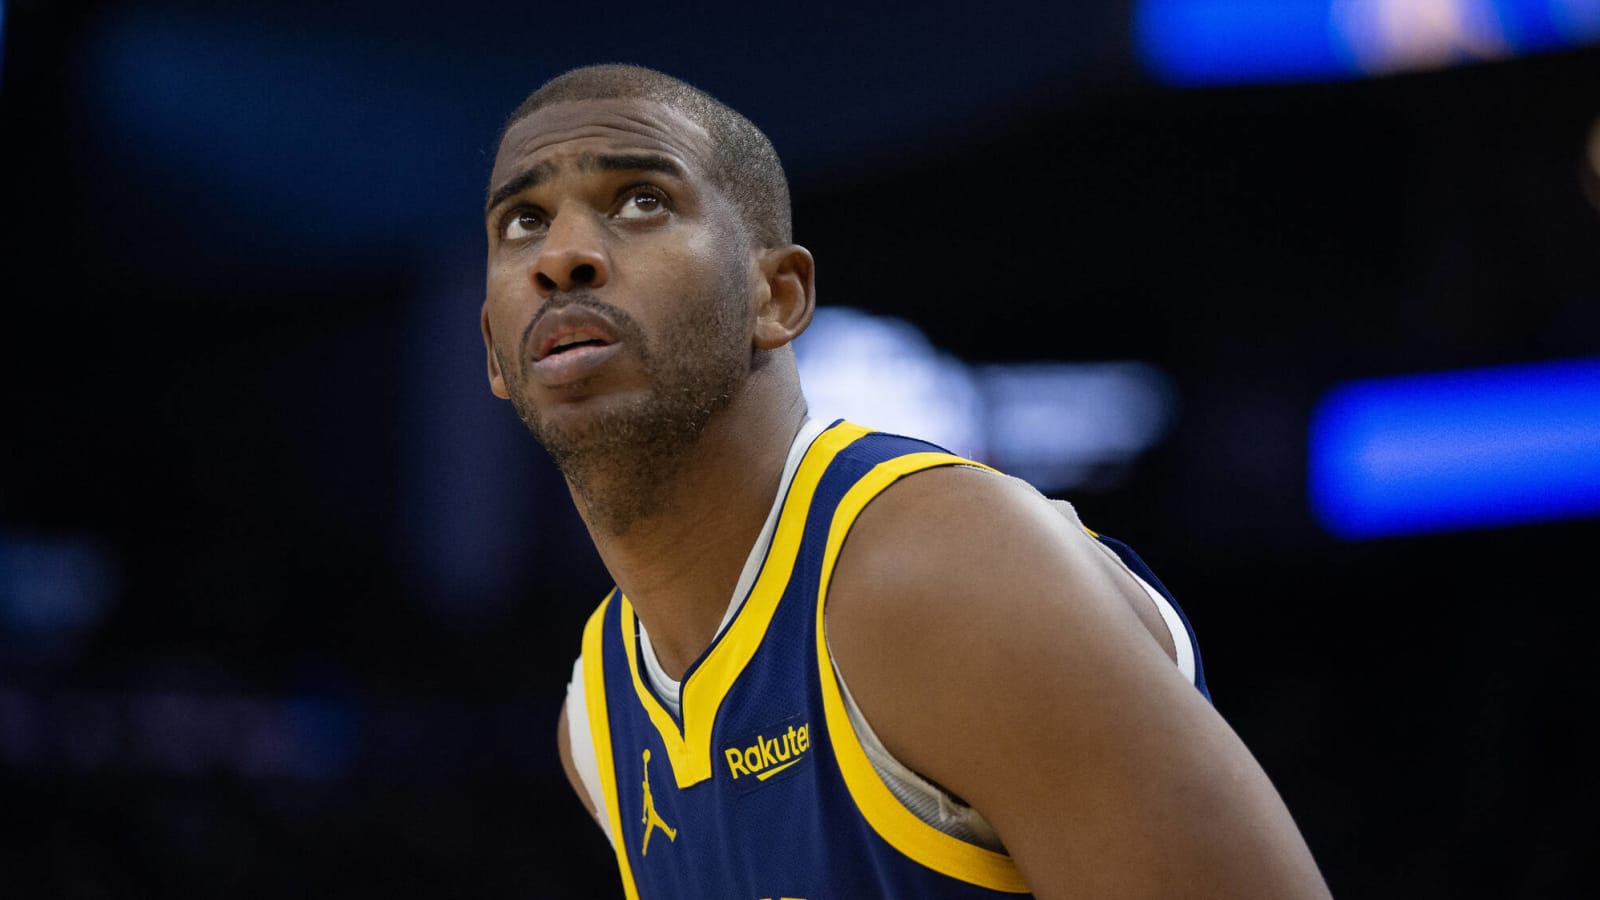 Chris Paul's desire for a championship could see him change teams